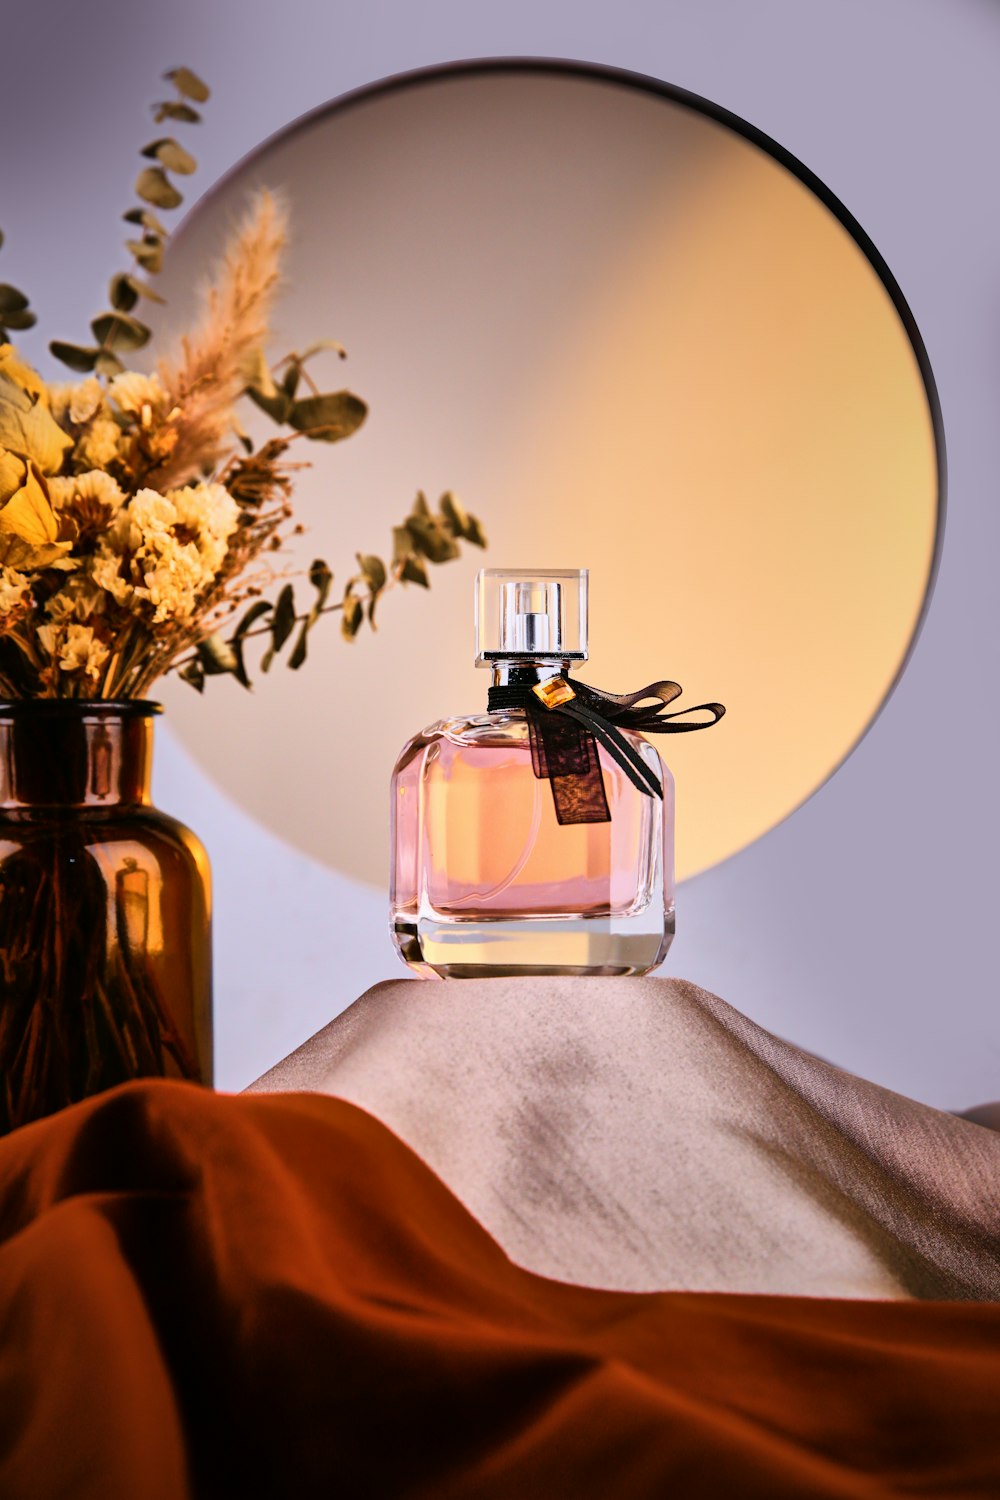 a bottle of perfume next to a vase with flowers